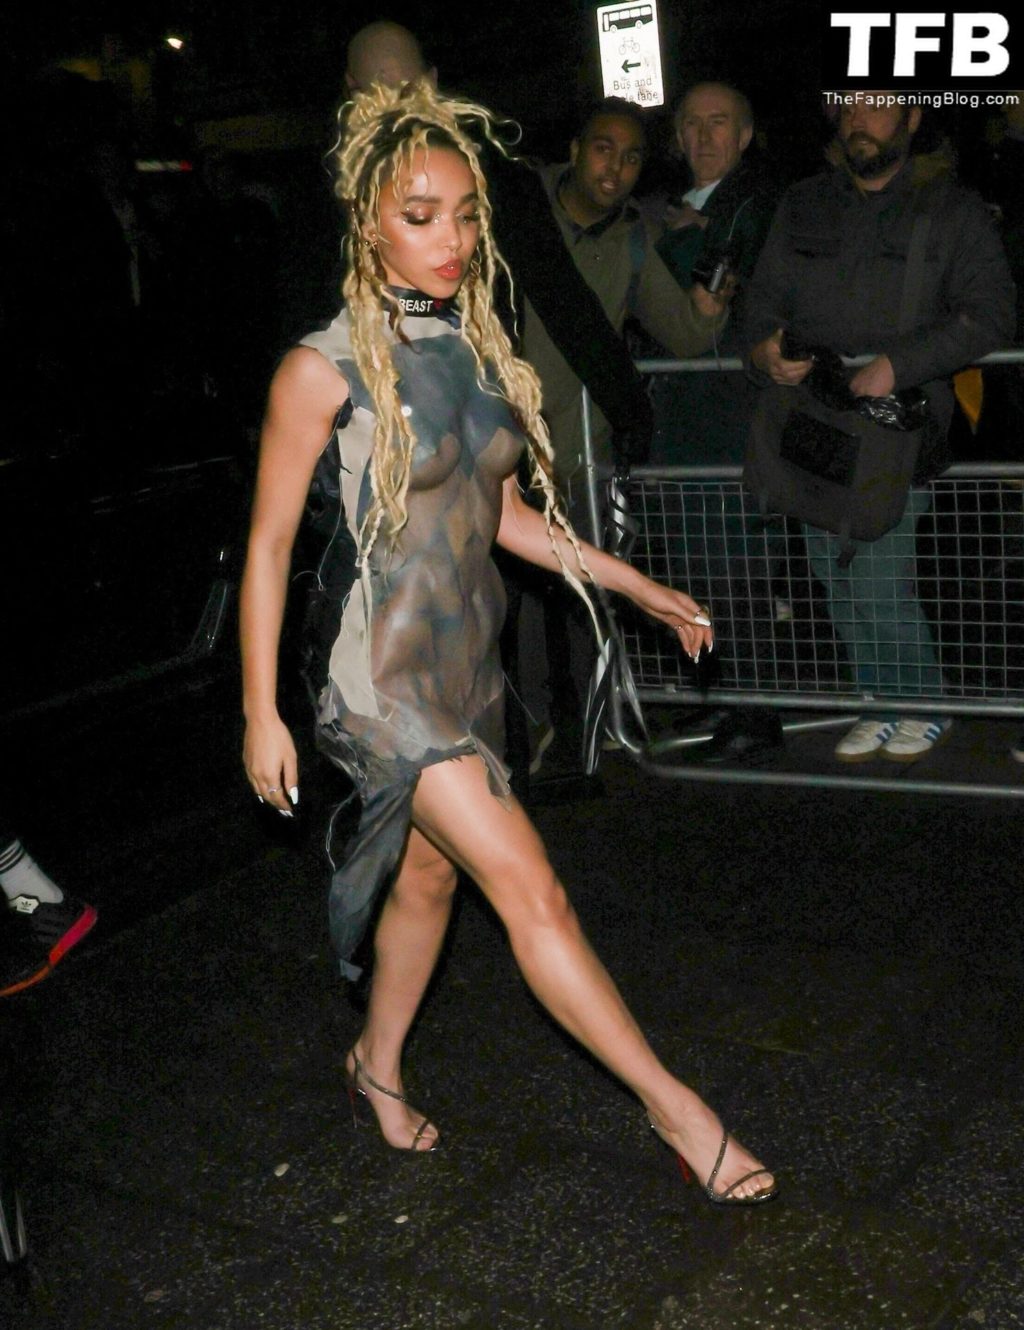 FKA Twigs Nude The Fappening Blog 2 1024x1330 - FKA Twigs Flashes Her Nude Tits & Legs the NME Awards in London (14 Photos)